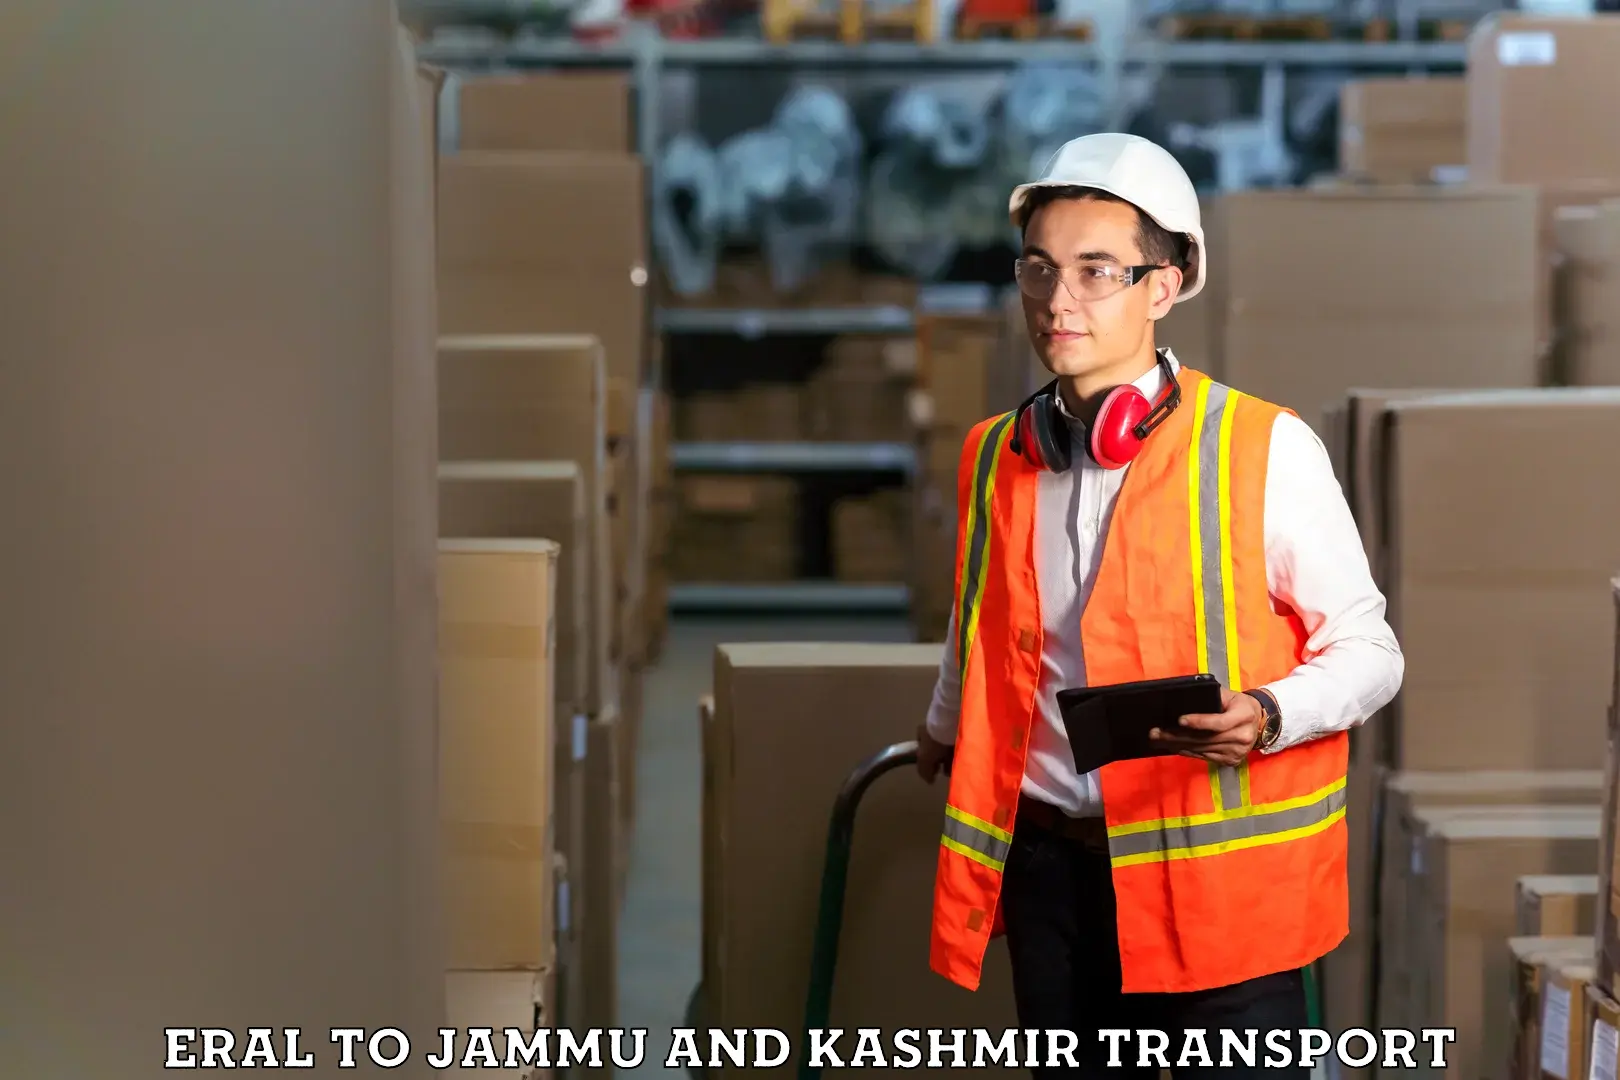 Daily transport service Eral to Jammu and Kashmir